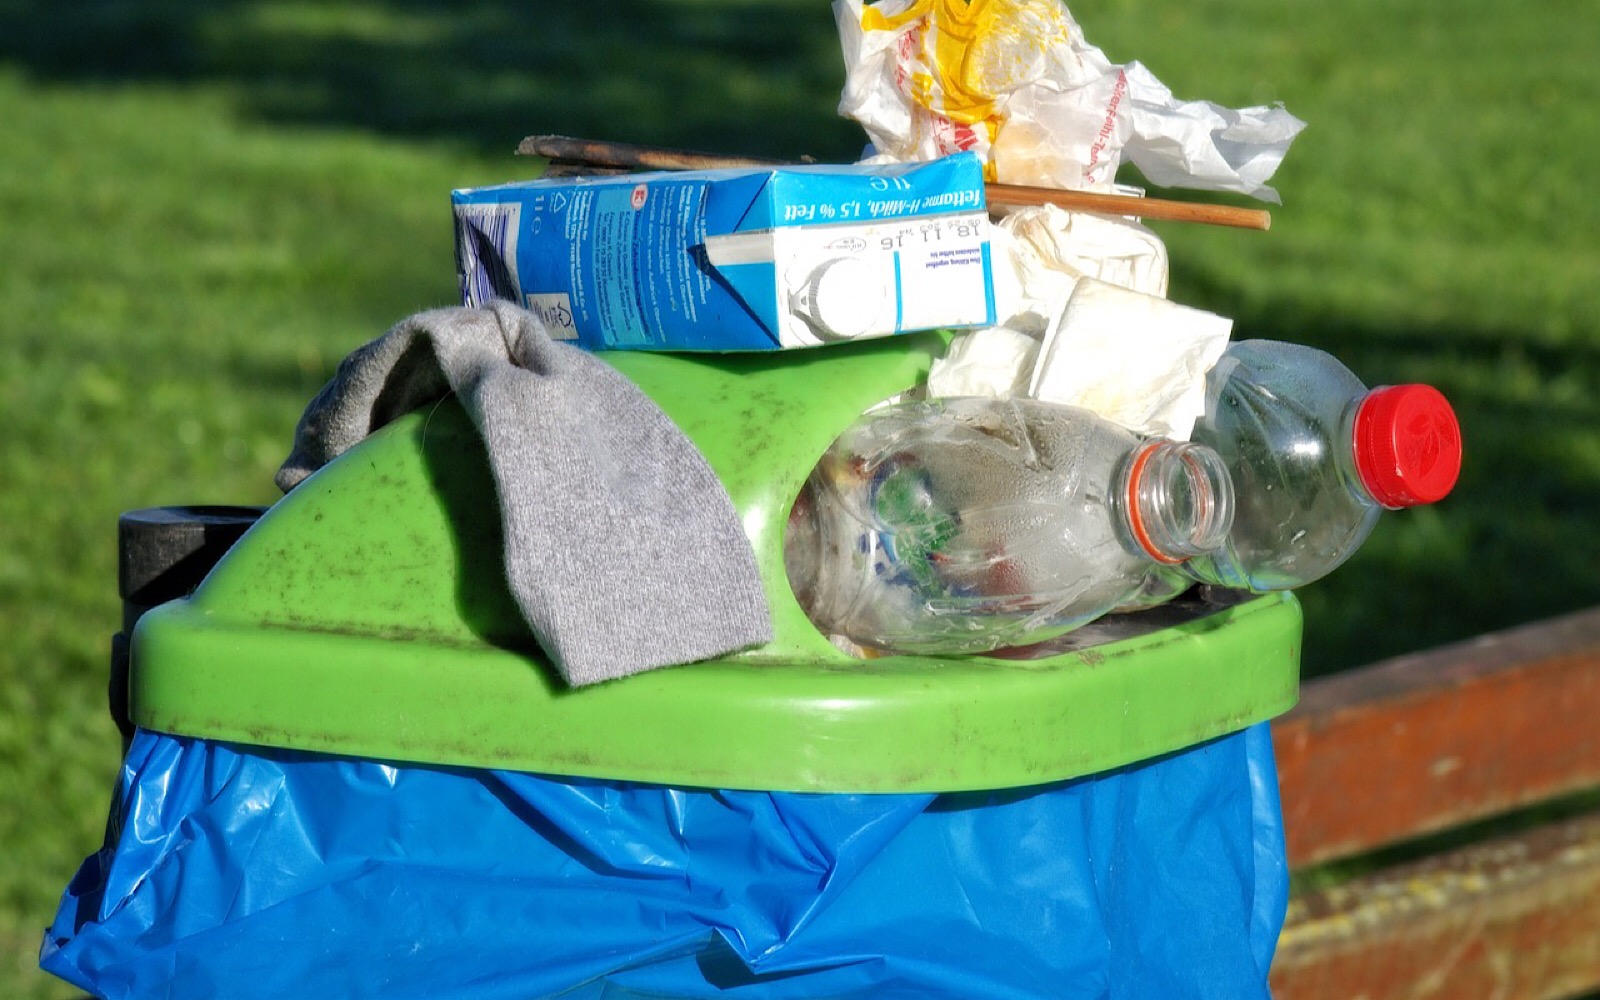 Bottles in and on top of trash can